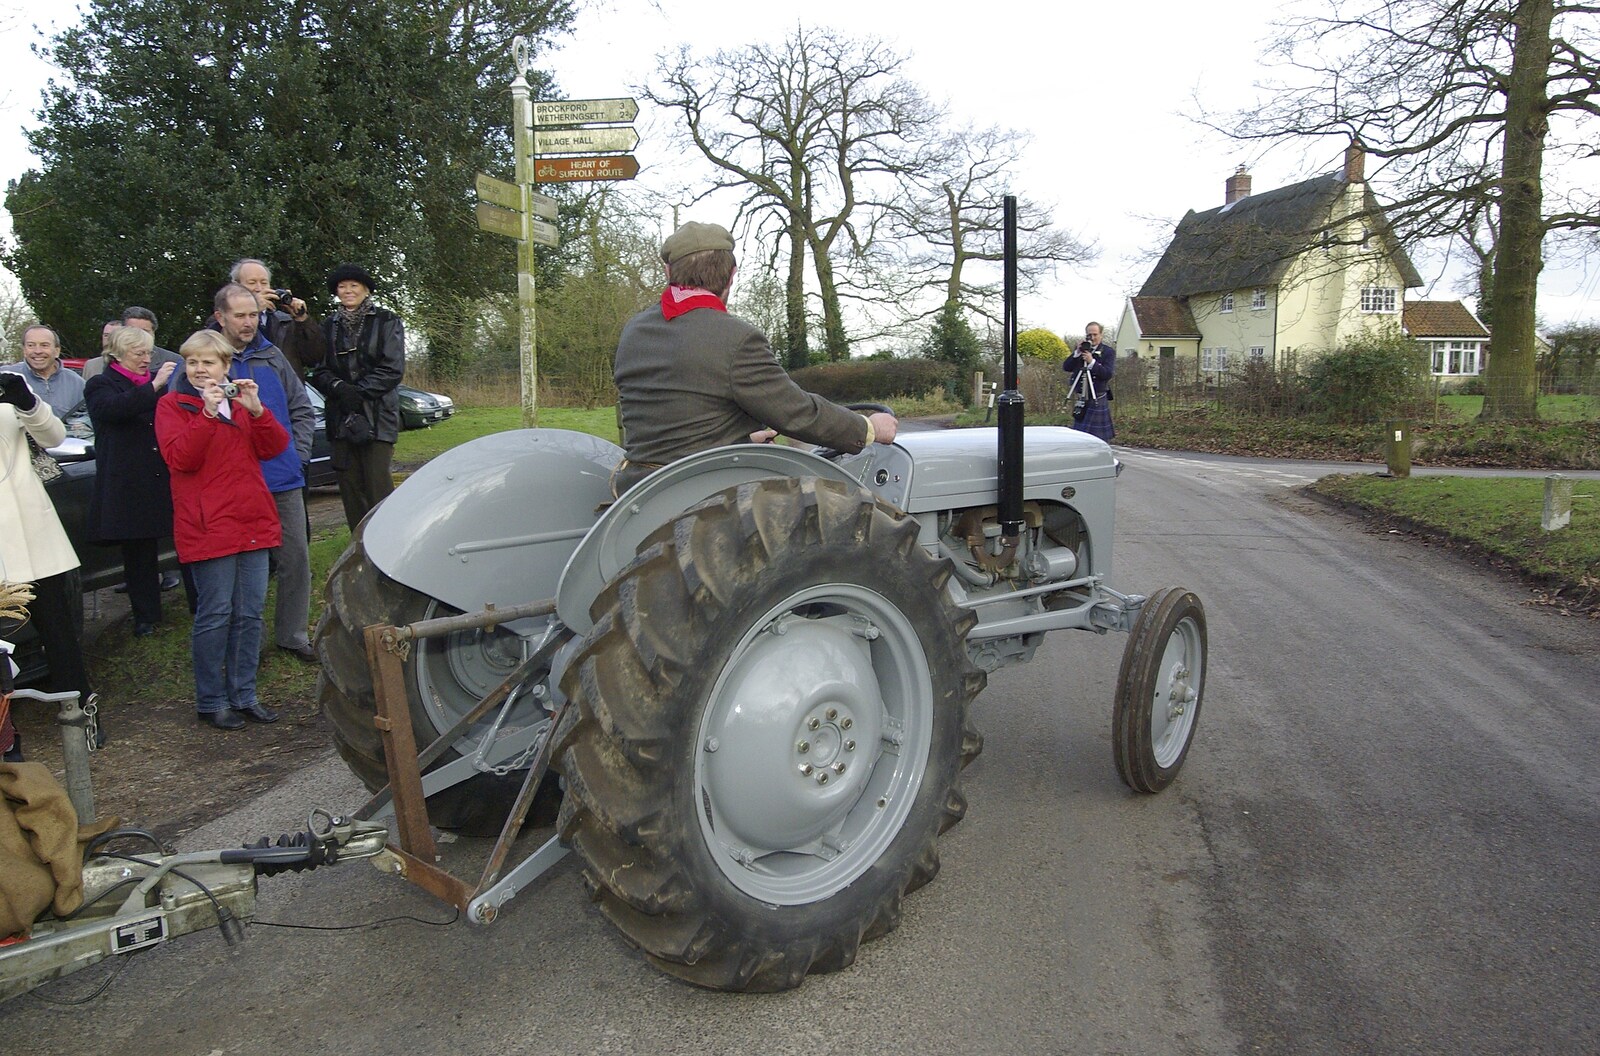 The tractor pulls out onto the street from Gov and Rachel's Wedding, Thorndon, Suffolk - 2nd February 2008